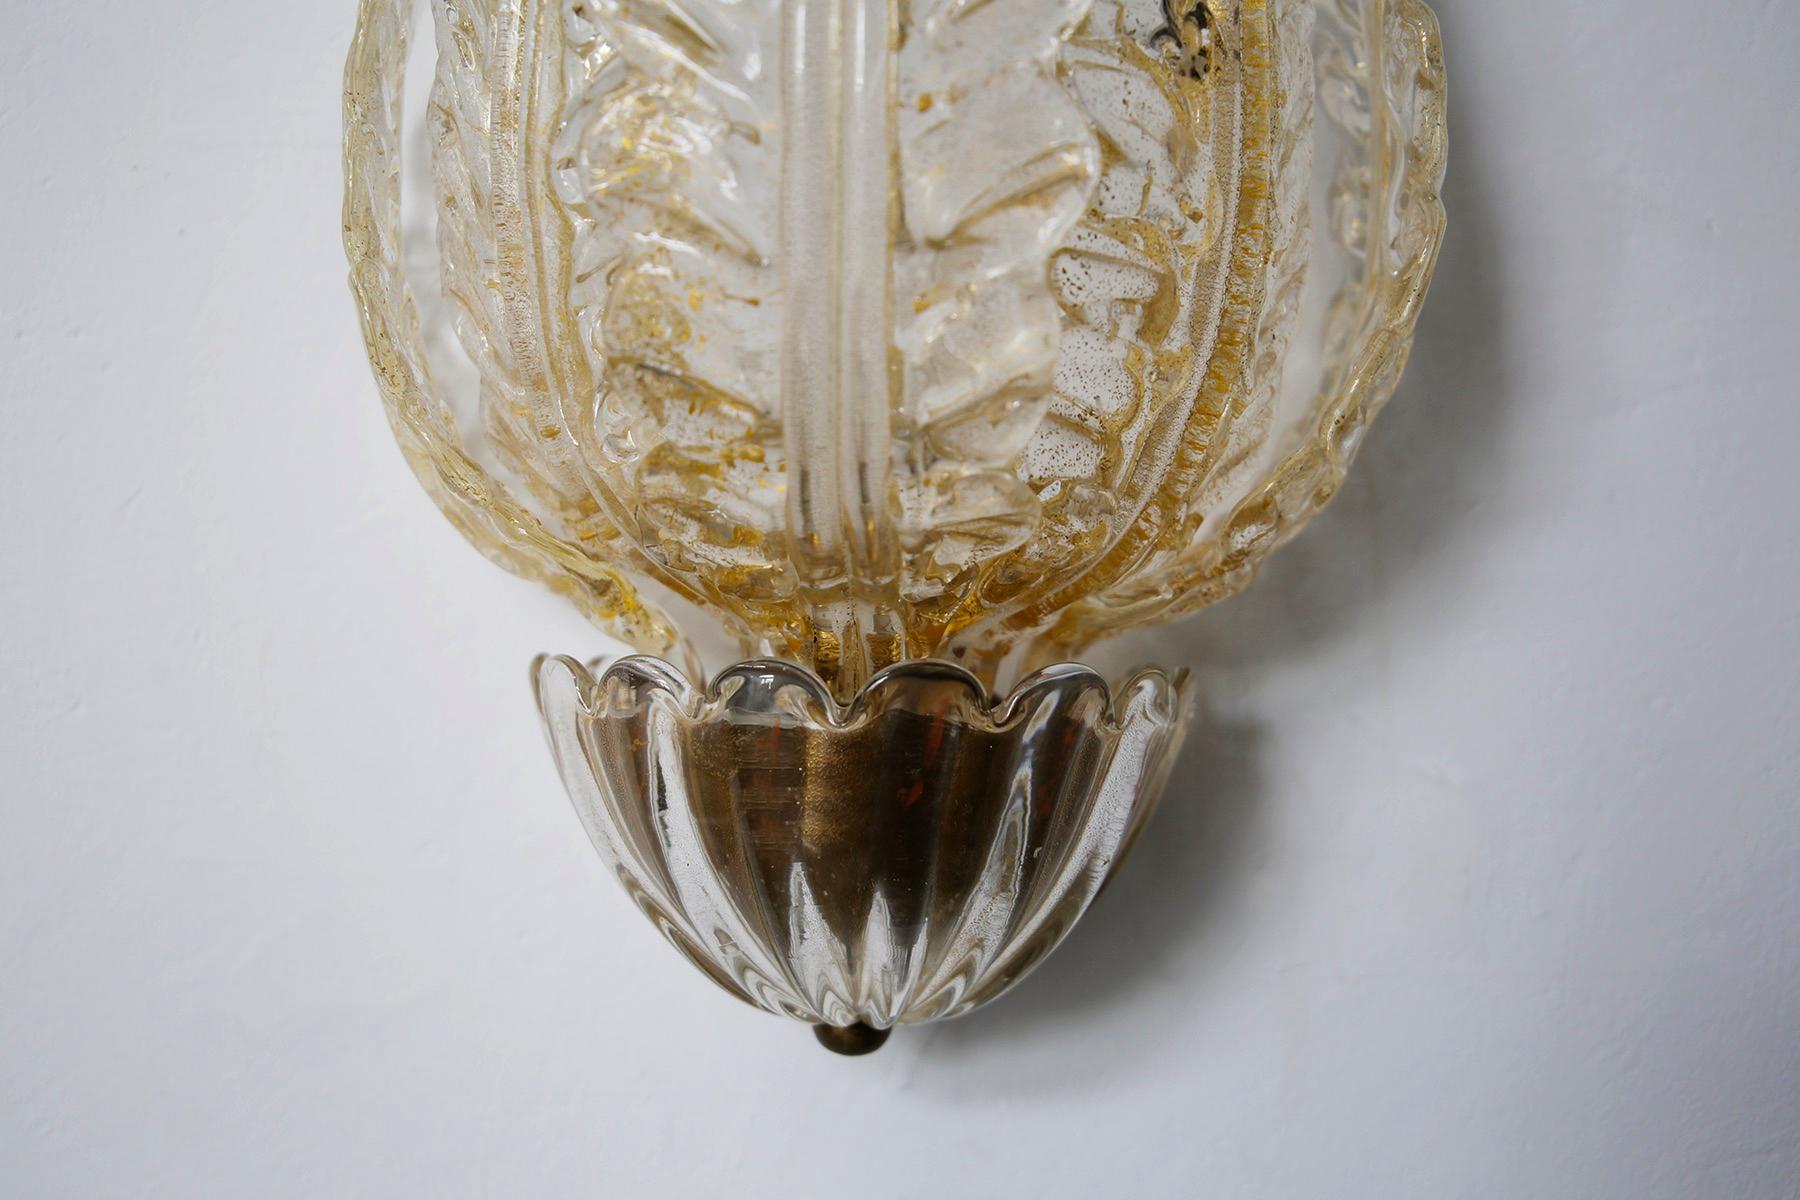 Italian Venini Wall Lamp in Murano Glass Gold and Brass with Three Leaves, from 1930s For Sale